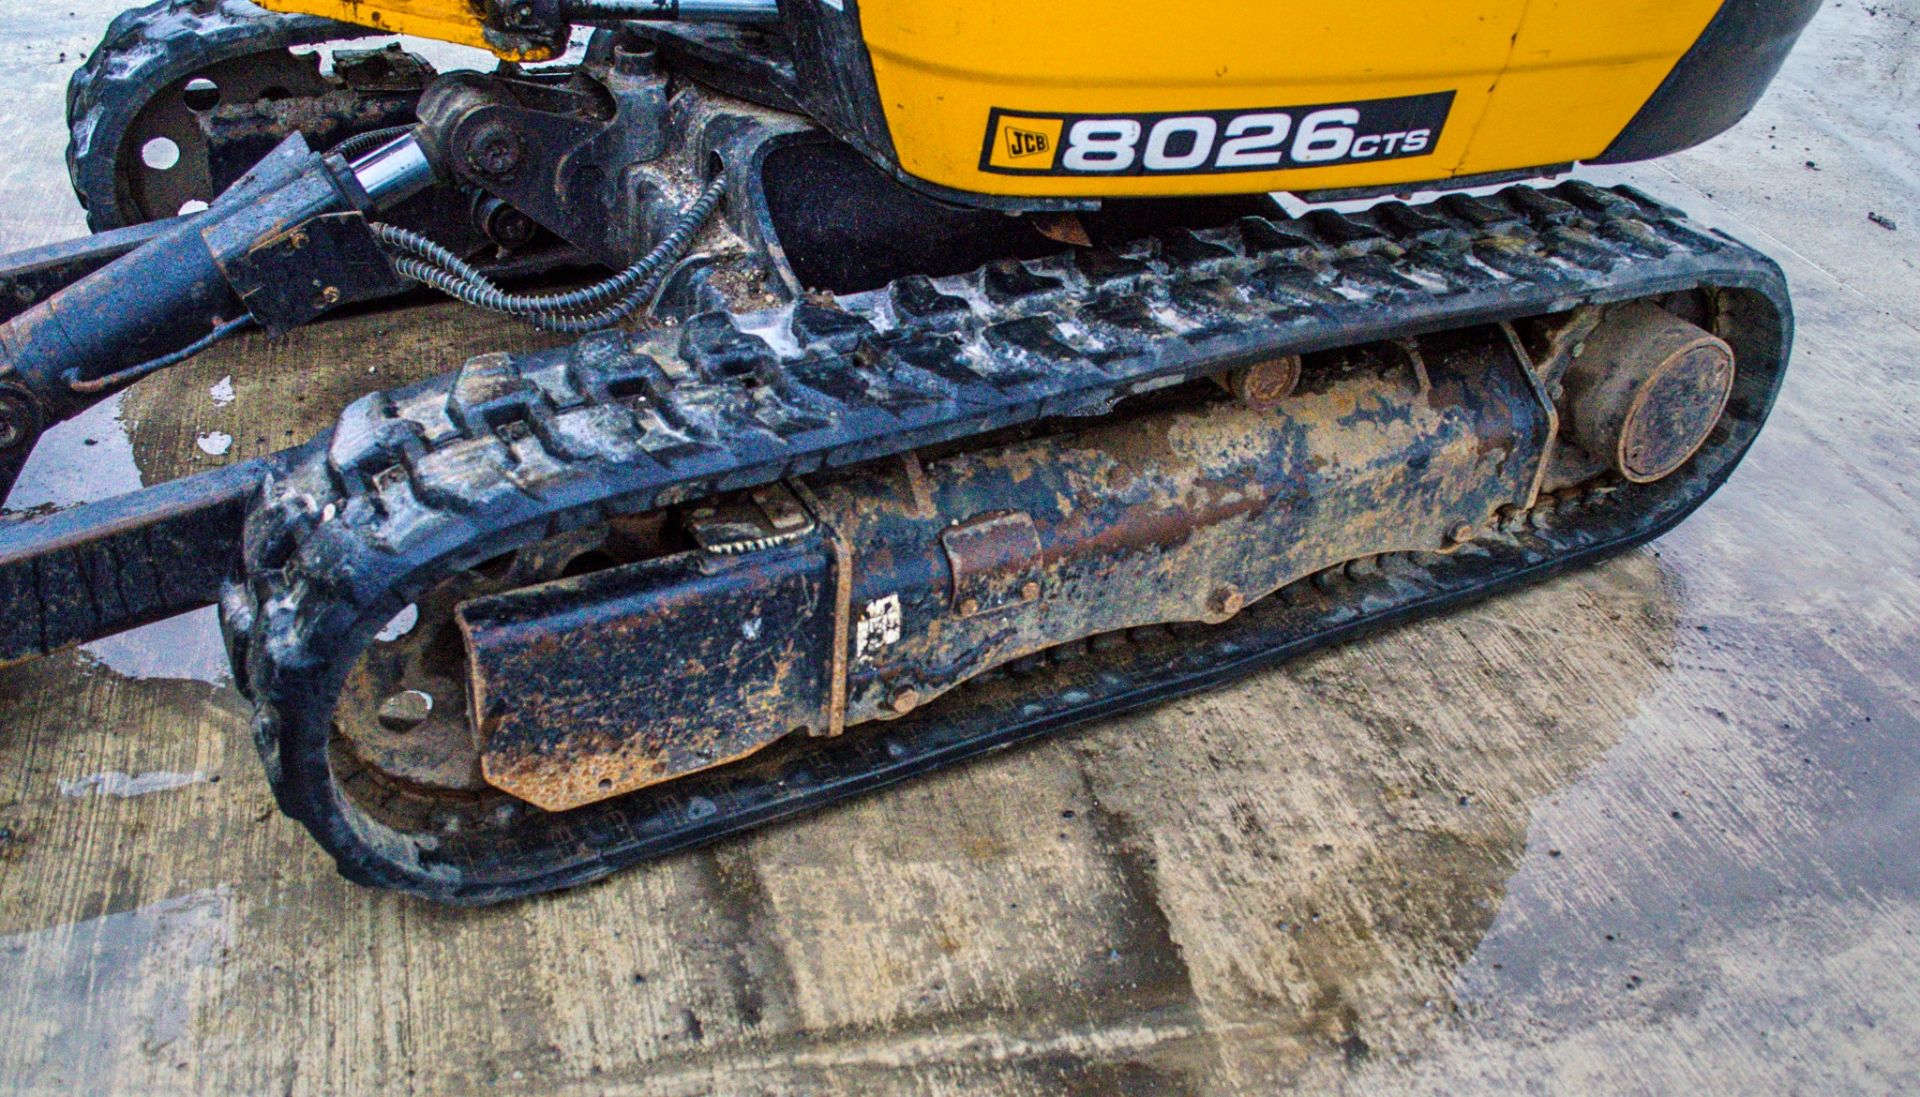 JCB 8026 CTS 2.6 tonne rubber tracked mini excavator Year: 2018 S/N: 2675344 Recorded Hours: 2346 - Image 9 of 23